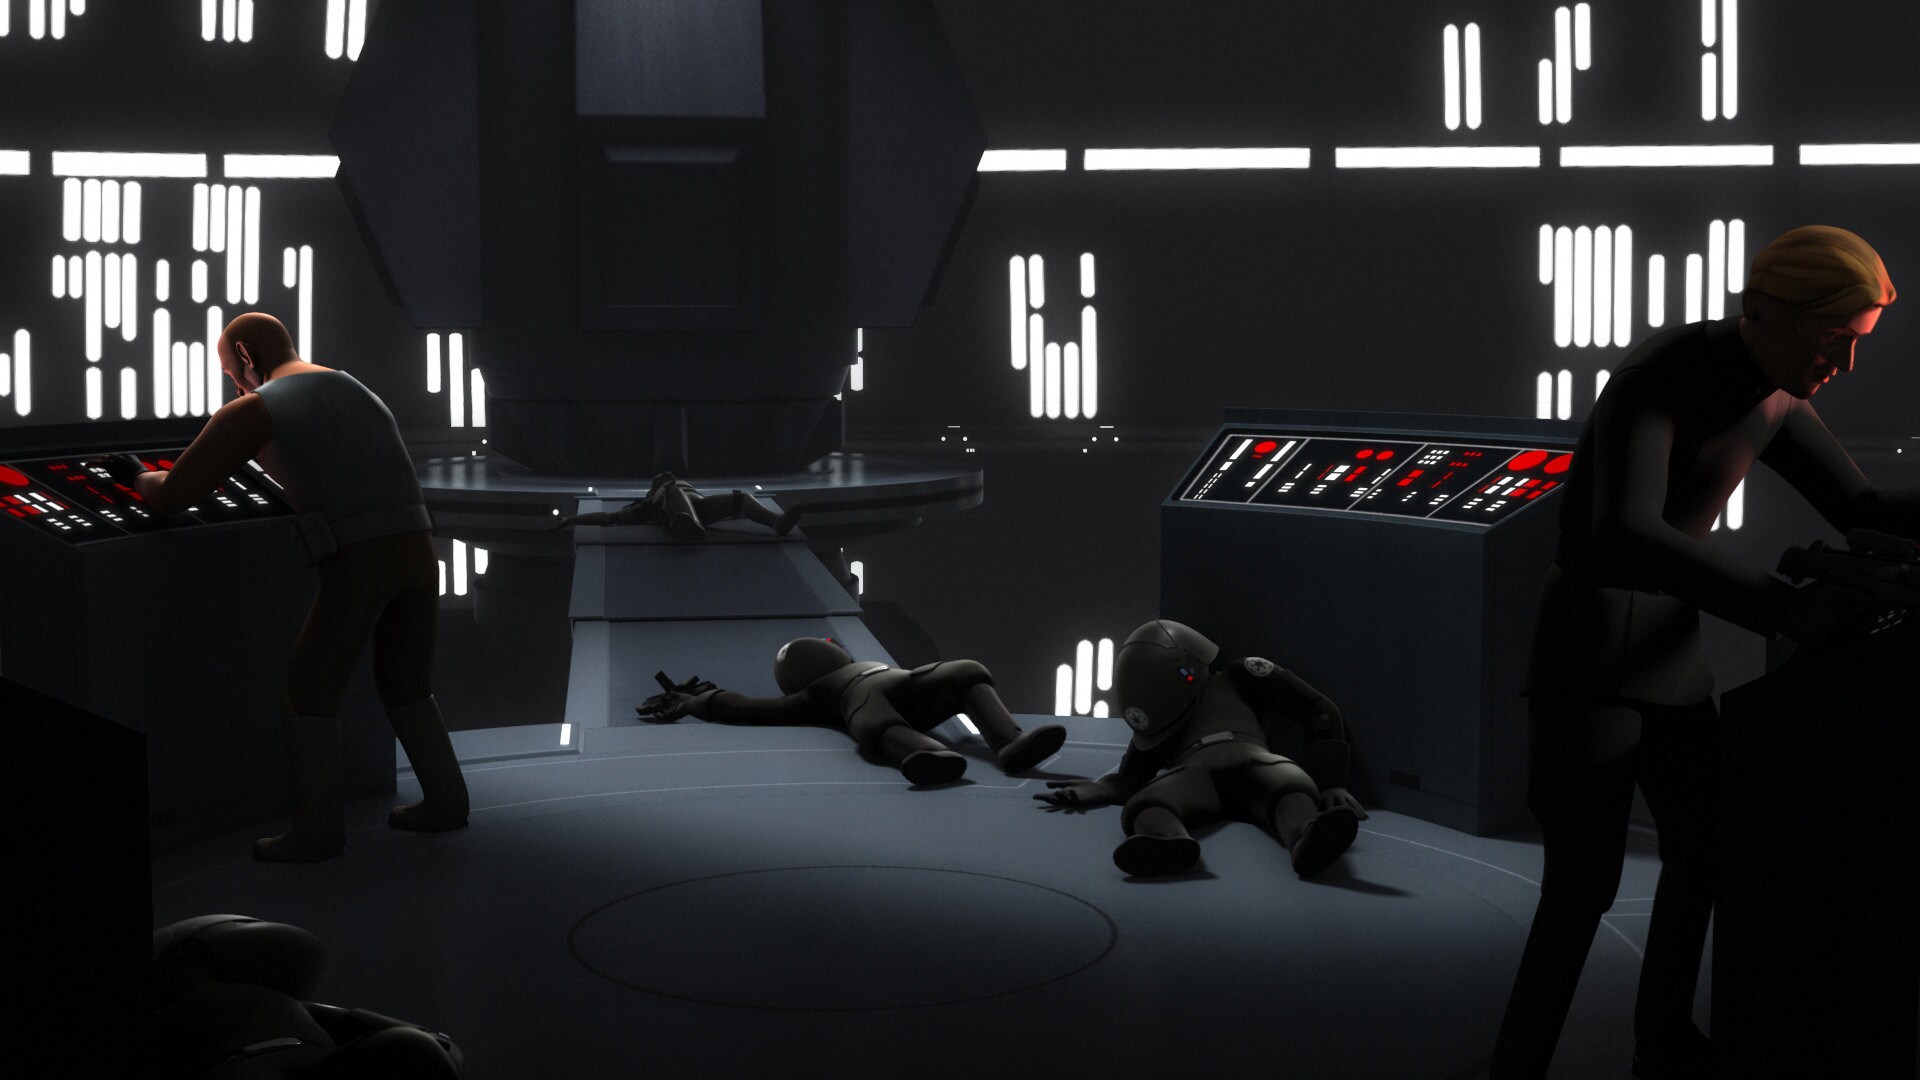 Finally, the rebels blast their way to the controls of the generator, but they suffer casualties....